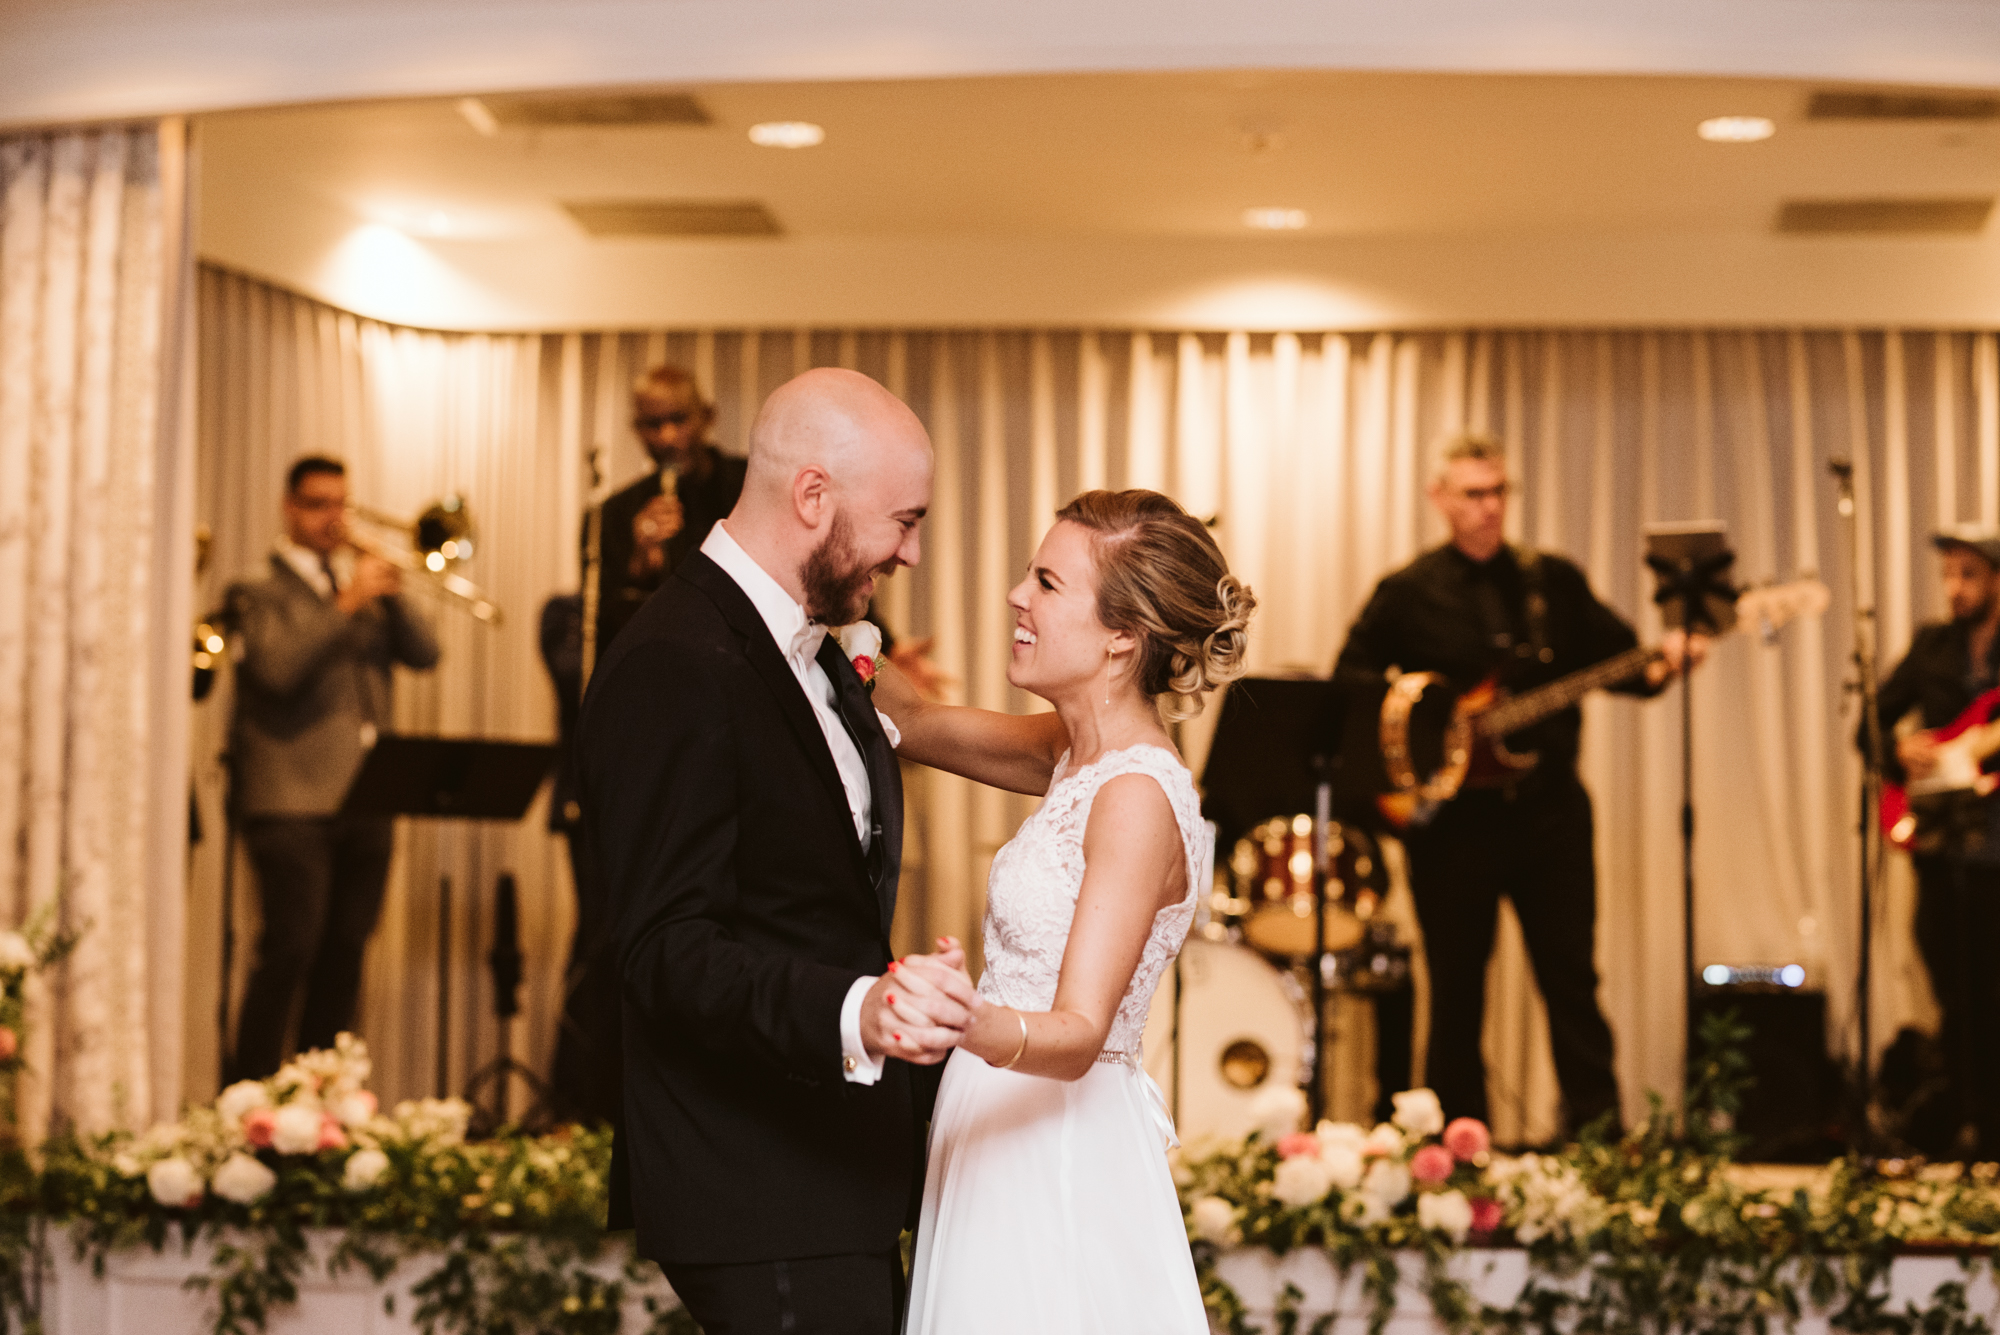 Elegant, Columbia Country Club, Chevy Chase Maryland, Baltimore Wedding Photographer, Classic, Bride and Groom First Dance, BHLDN Wedding Dress, Hugo Boss Suit, Sweet Hairafter, Bachelor Boys Band